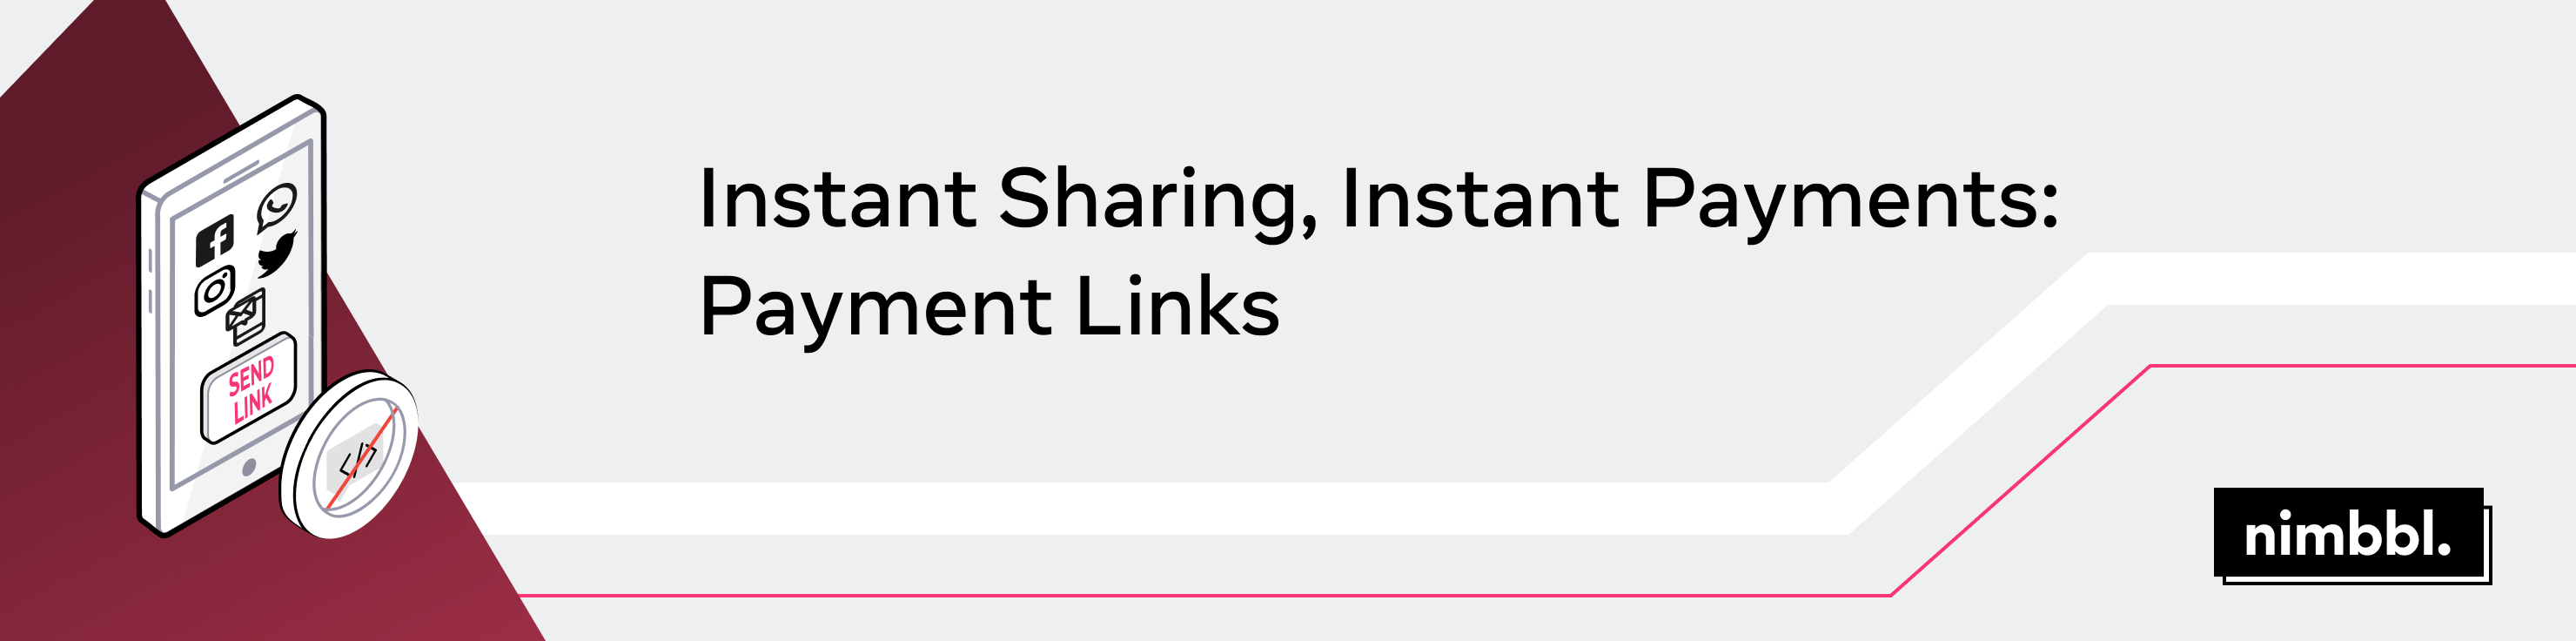 Instant Sharing, Instant Payments: Payment Links 